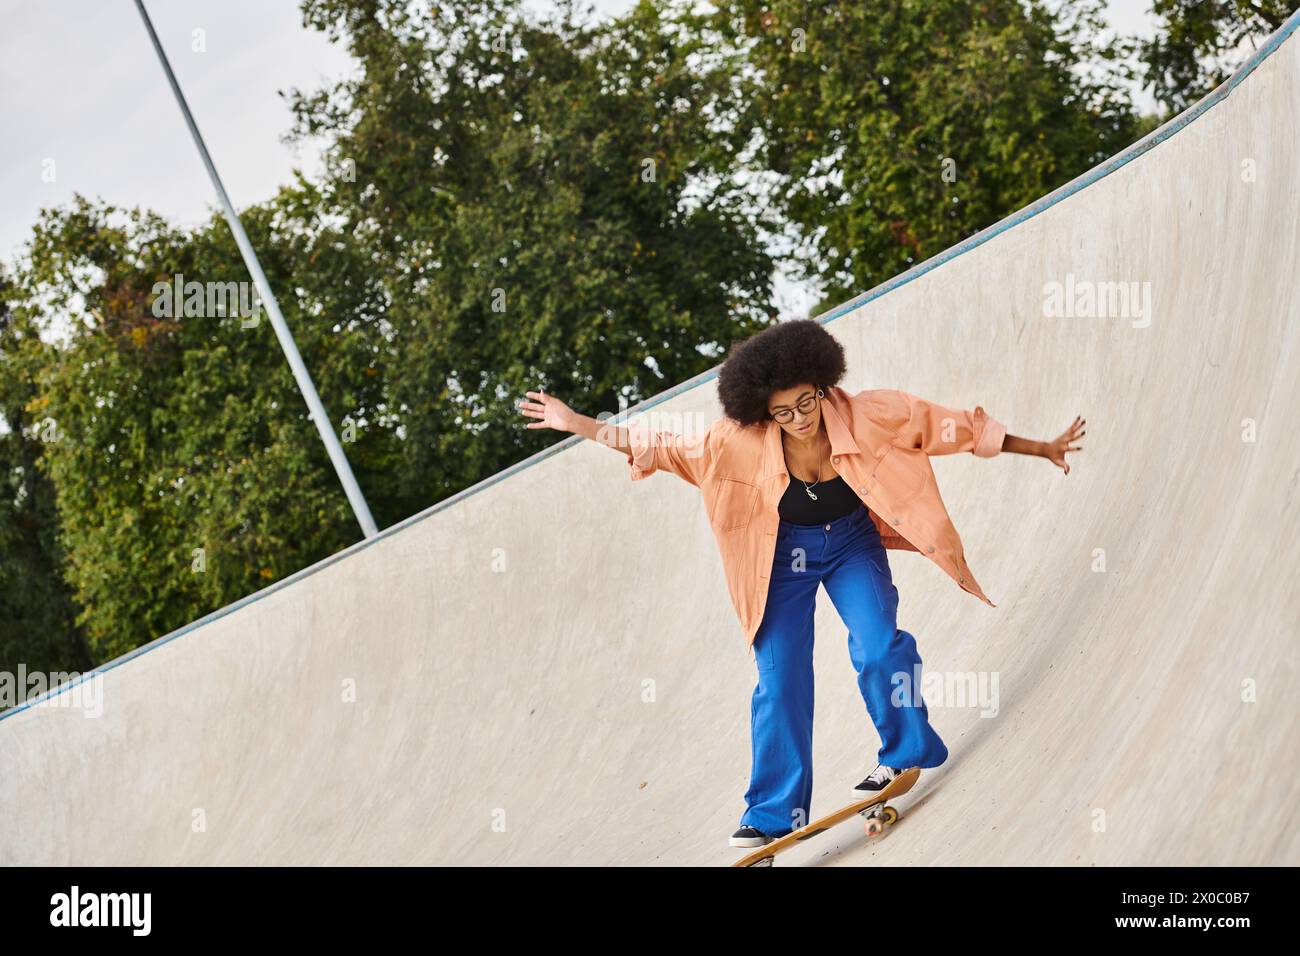 A young African American woman with curly hair riding a skateboard up the side of a ramp at an outdoor skate park. Stock Photo